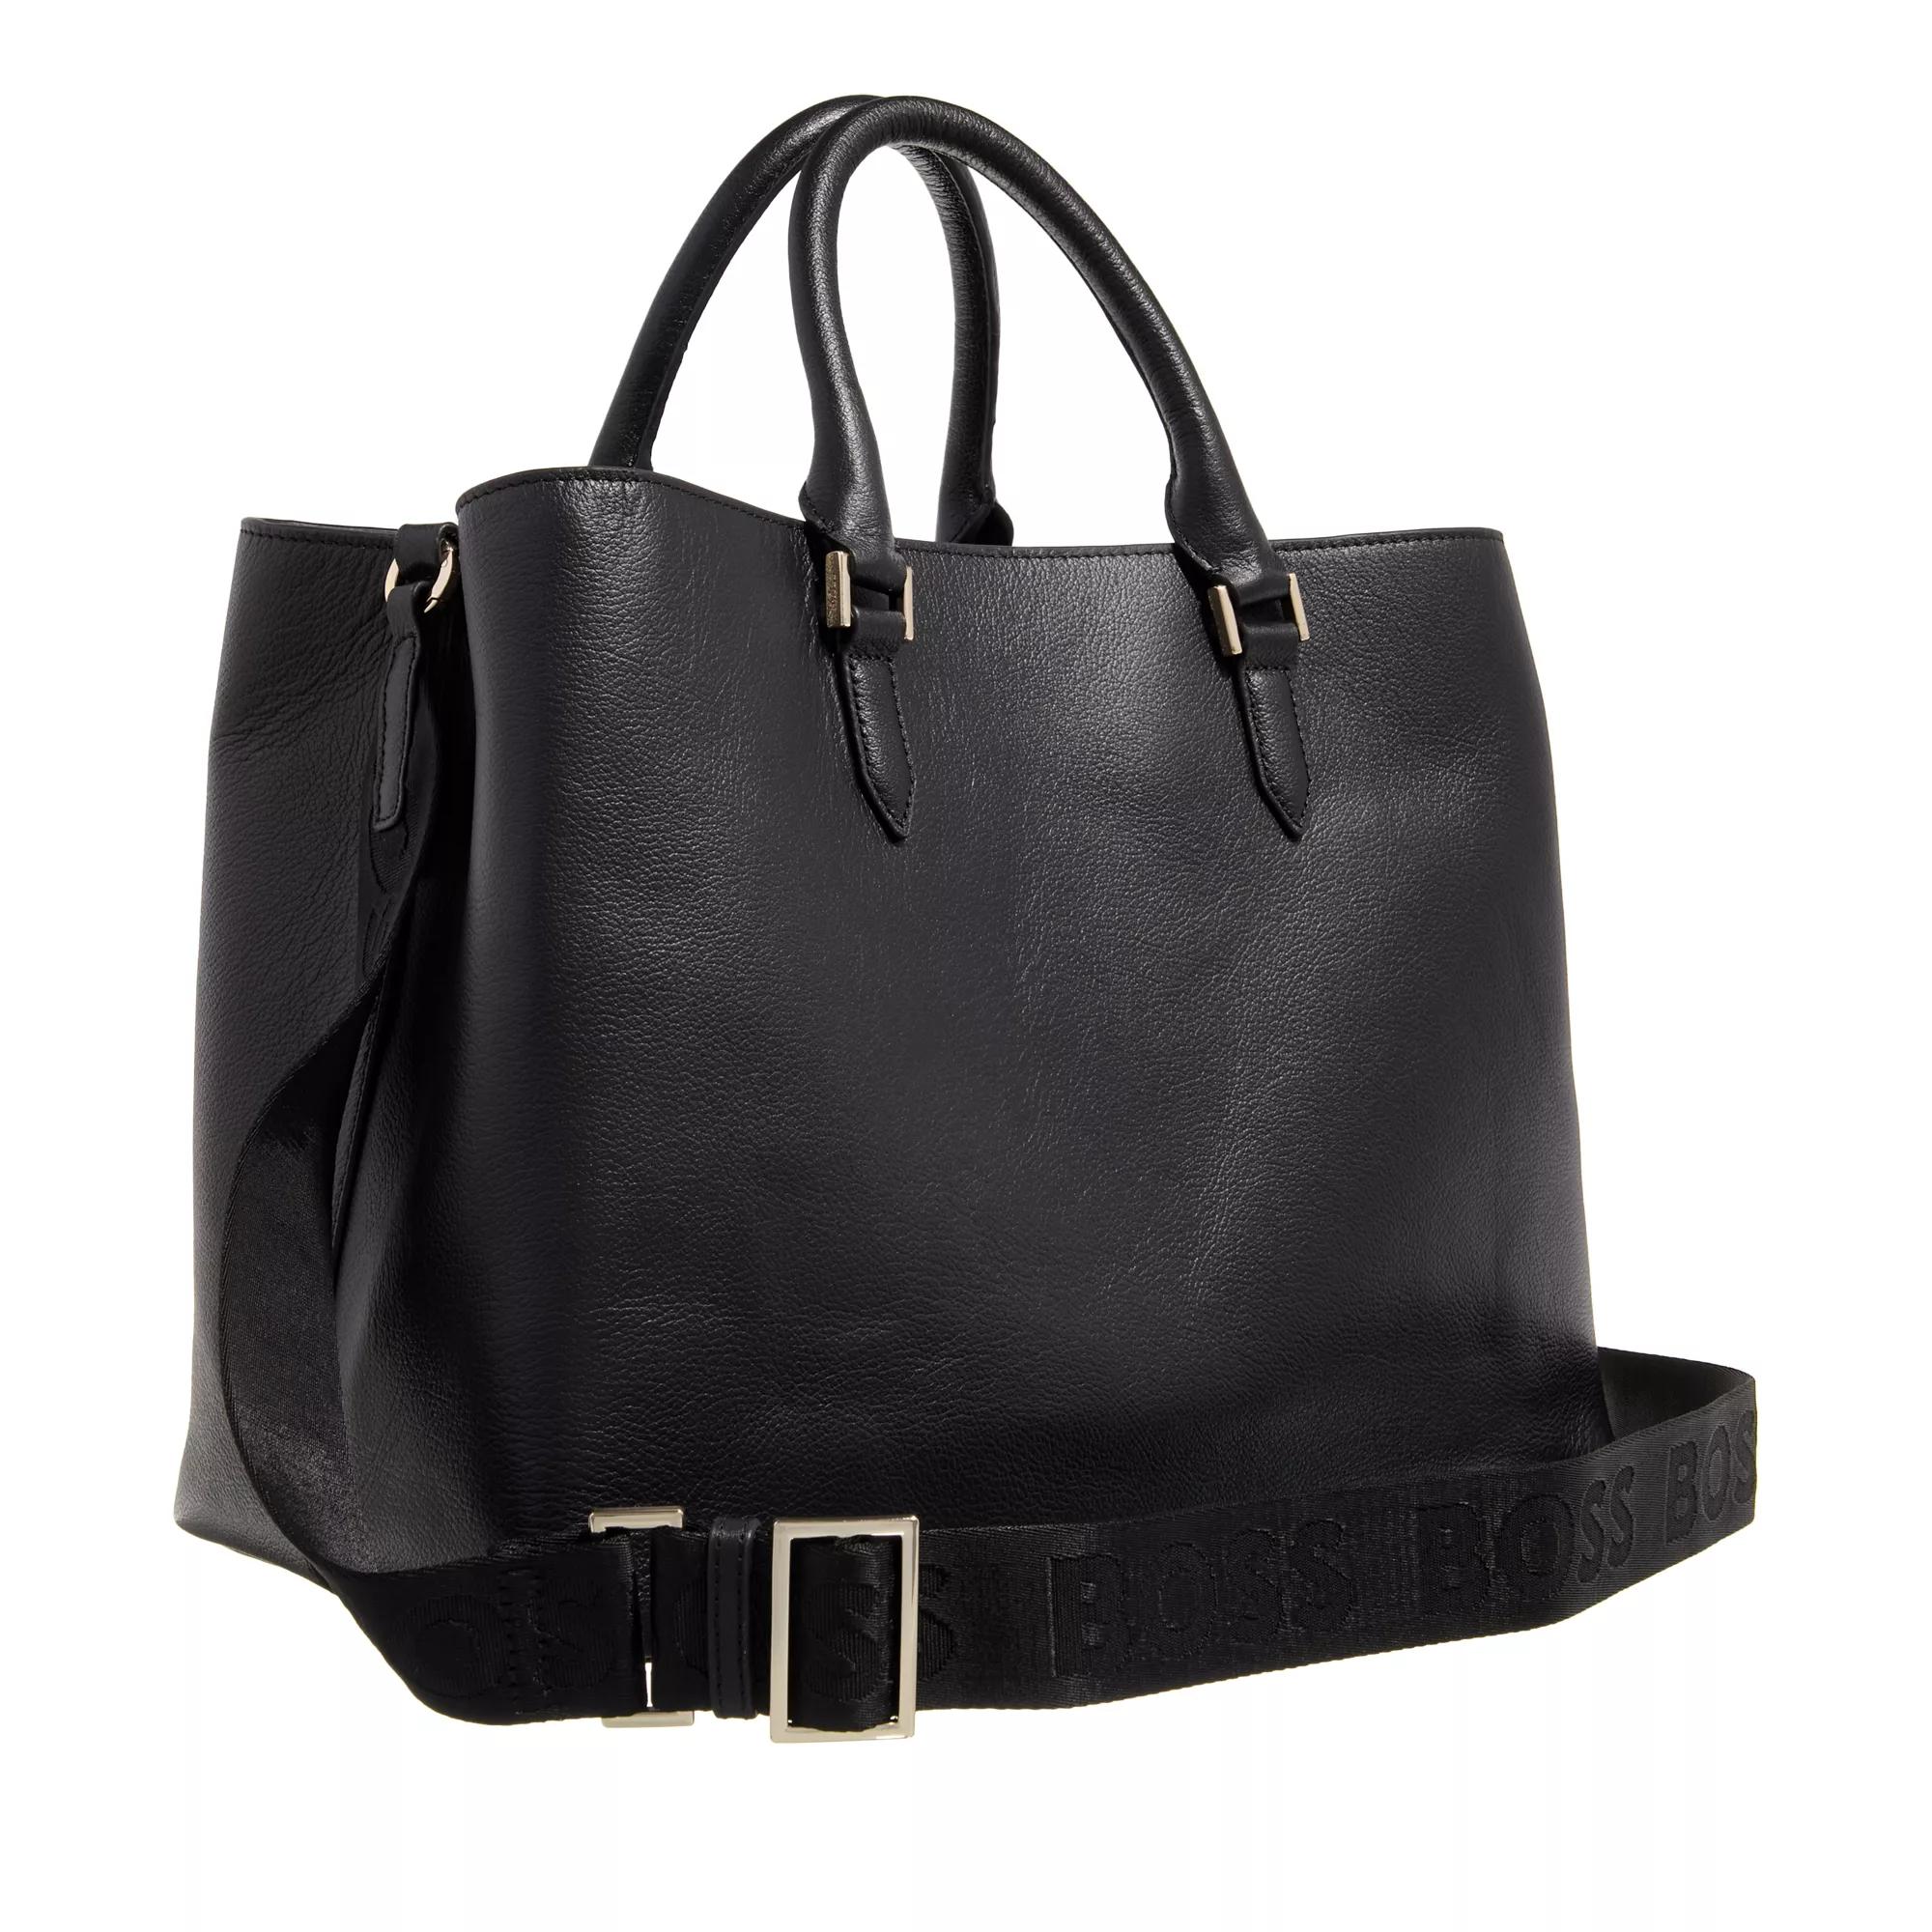 Boss Totes Alyce Business Tote in zwart